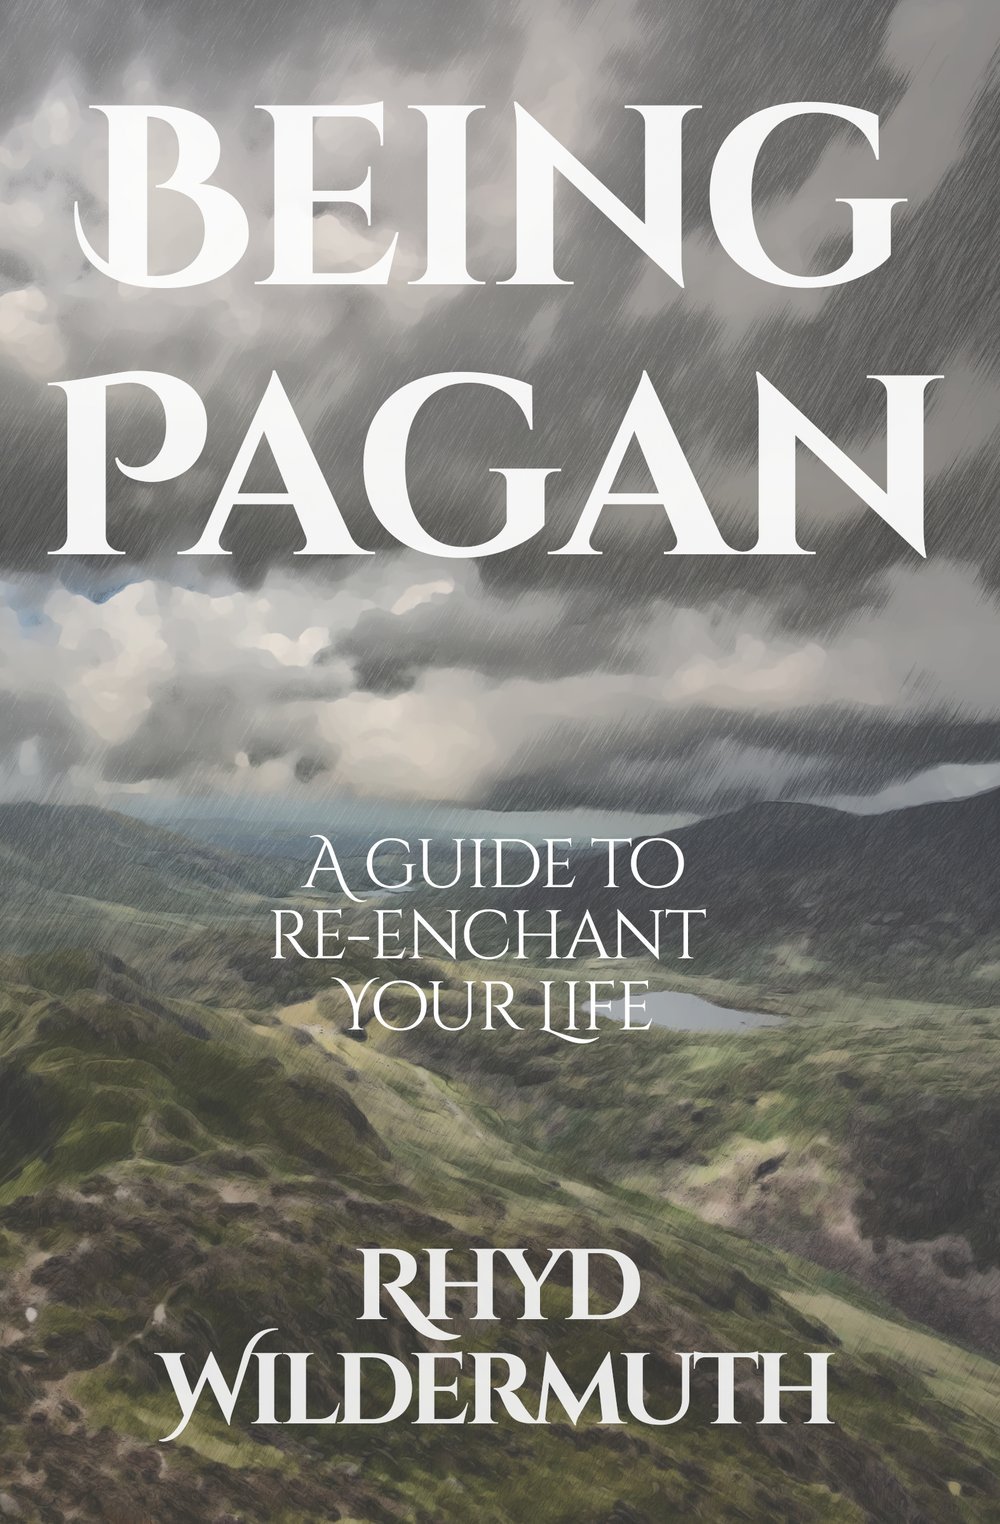 BEING+PAGAN+COVER1.JPG